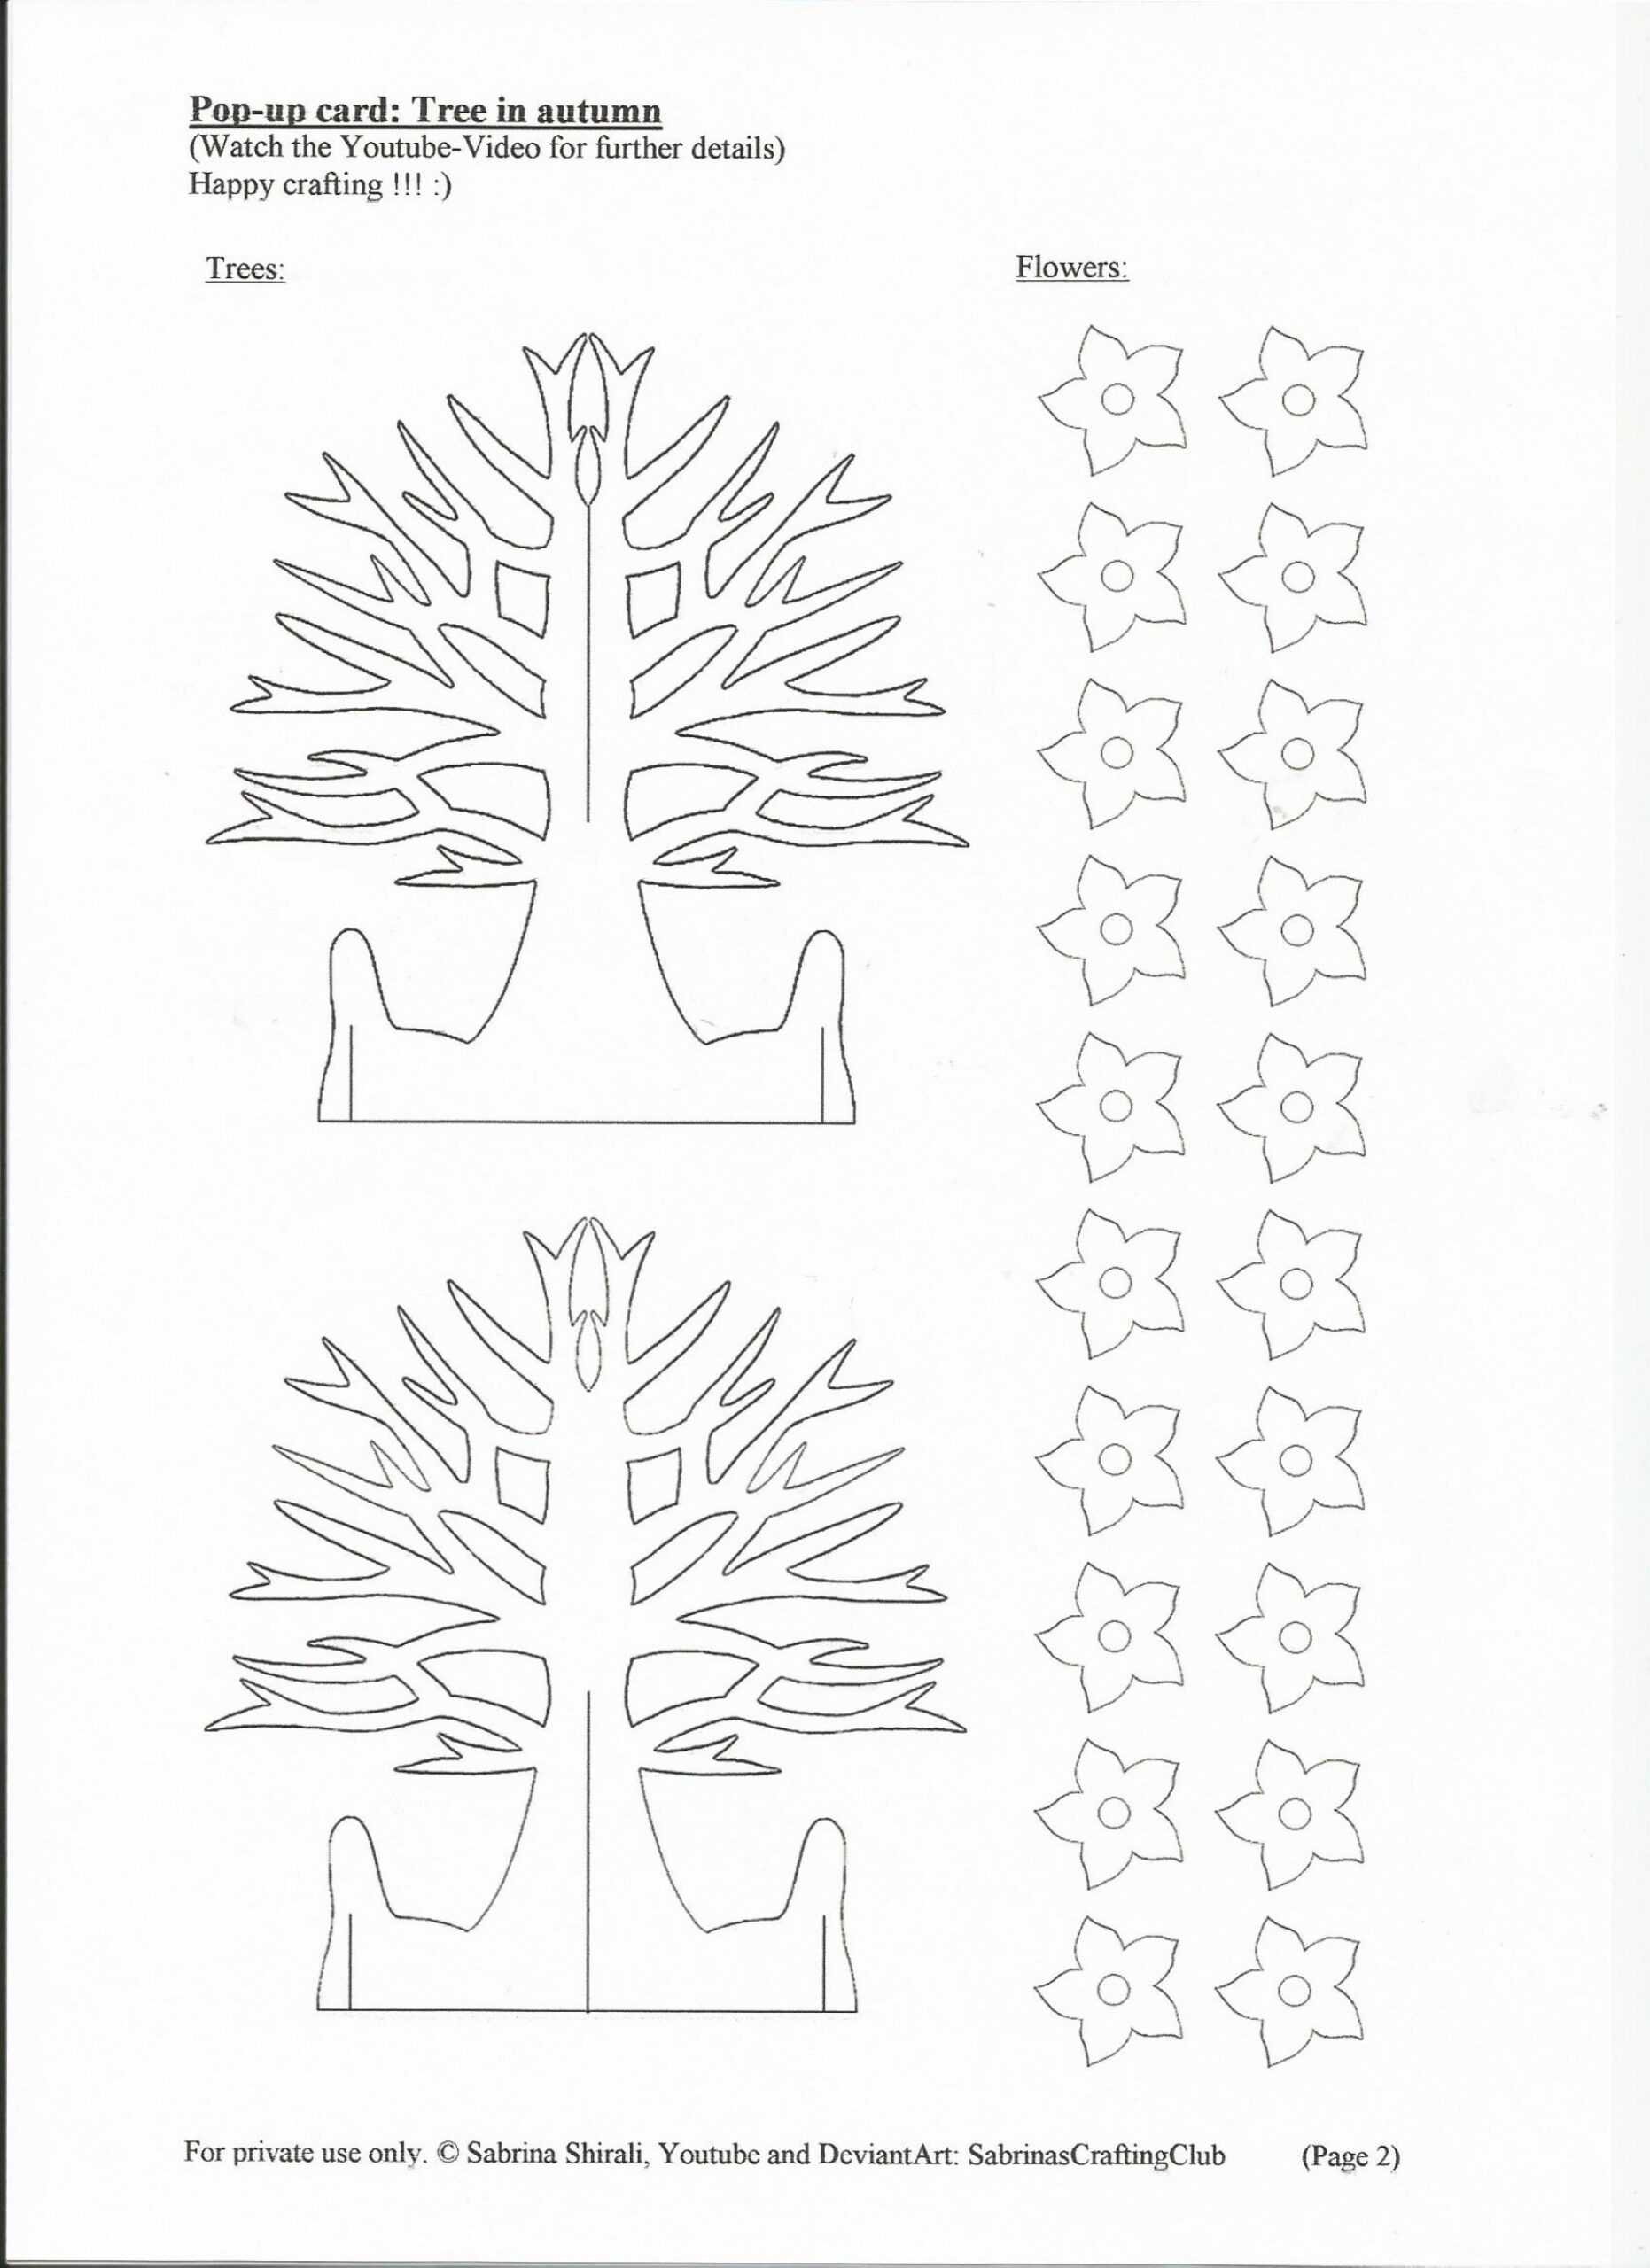 027 84614 10951579724 9338E5D5 Dca2 4412 9F59 413344C84Caf Throughout Pop Up Tree Card Template